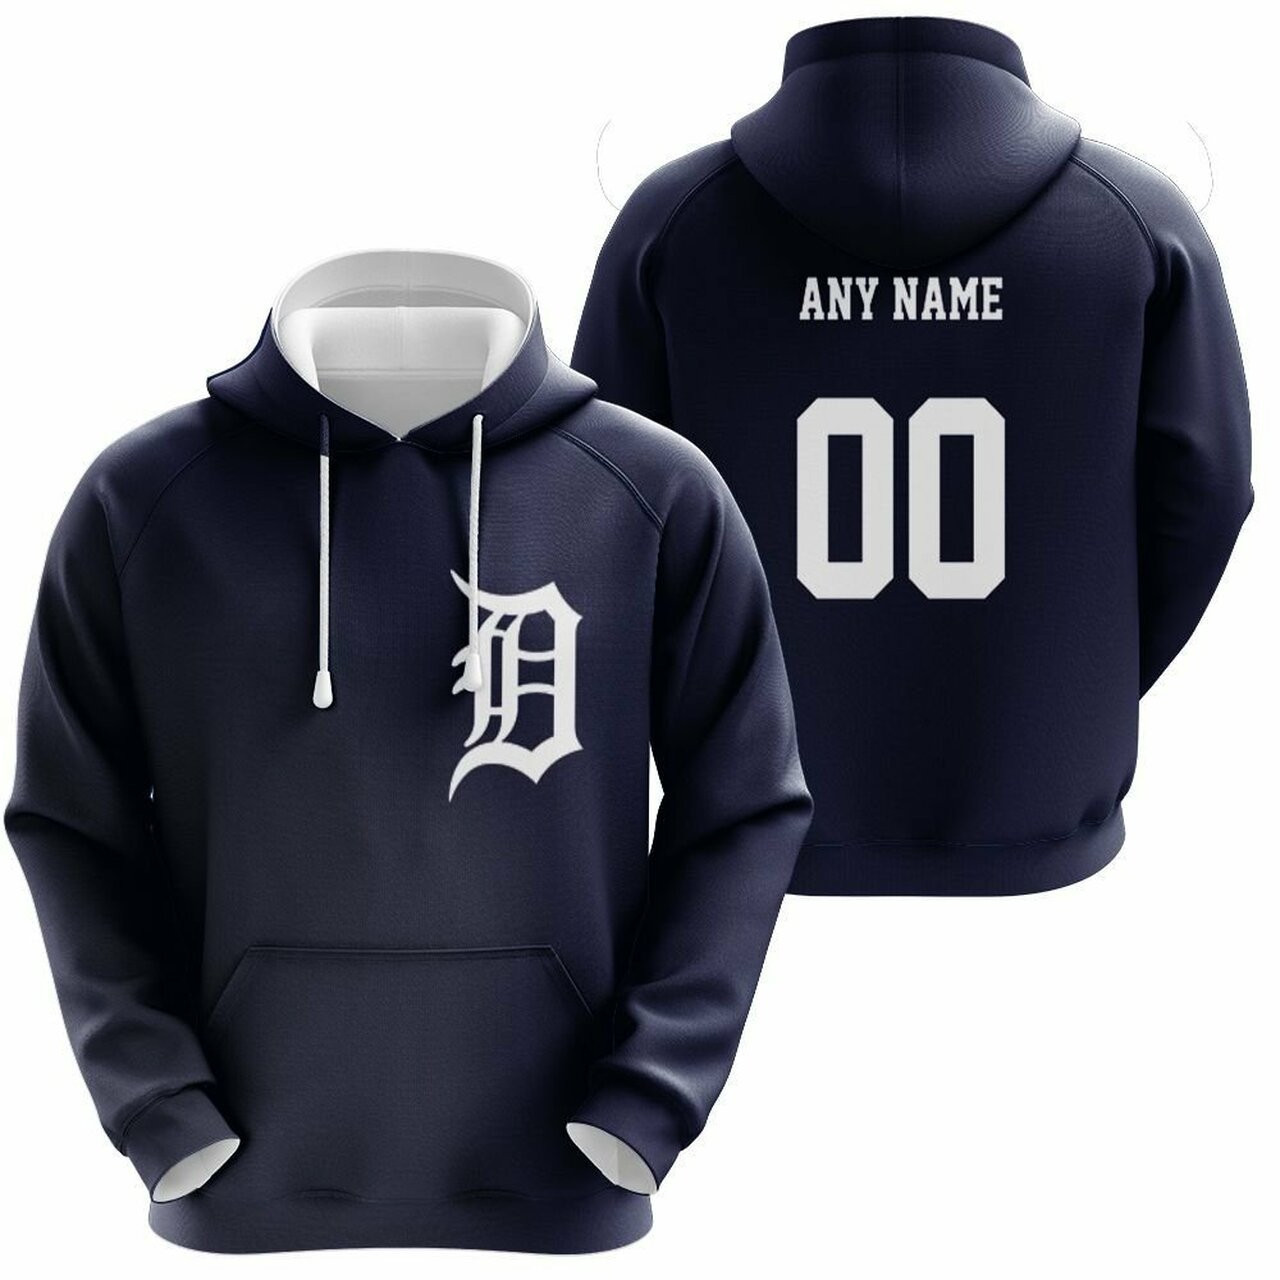 Personalized Detroit Tigers Anyname 00 2019 Team Black Jersey Inspired Style Gift For Detroit Tigers Fans Hoodie